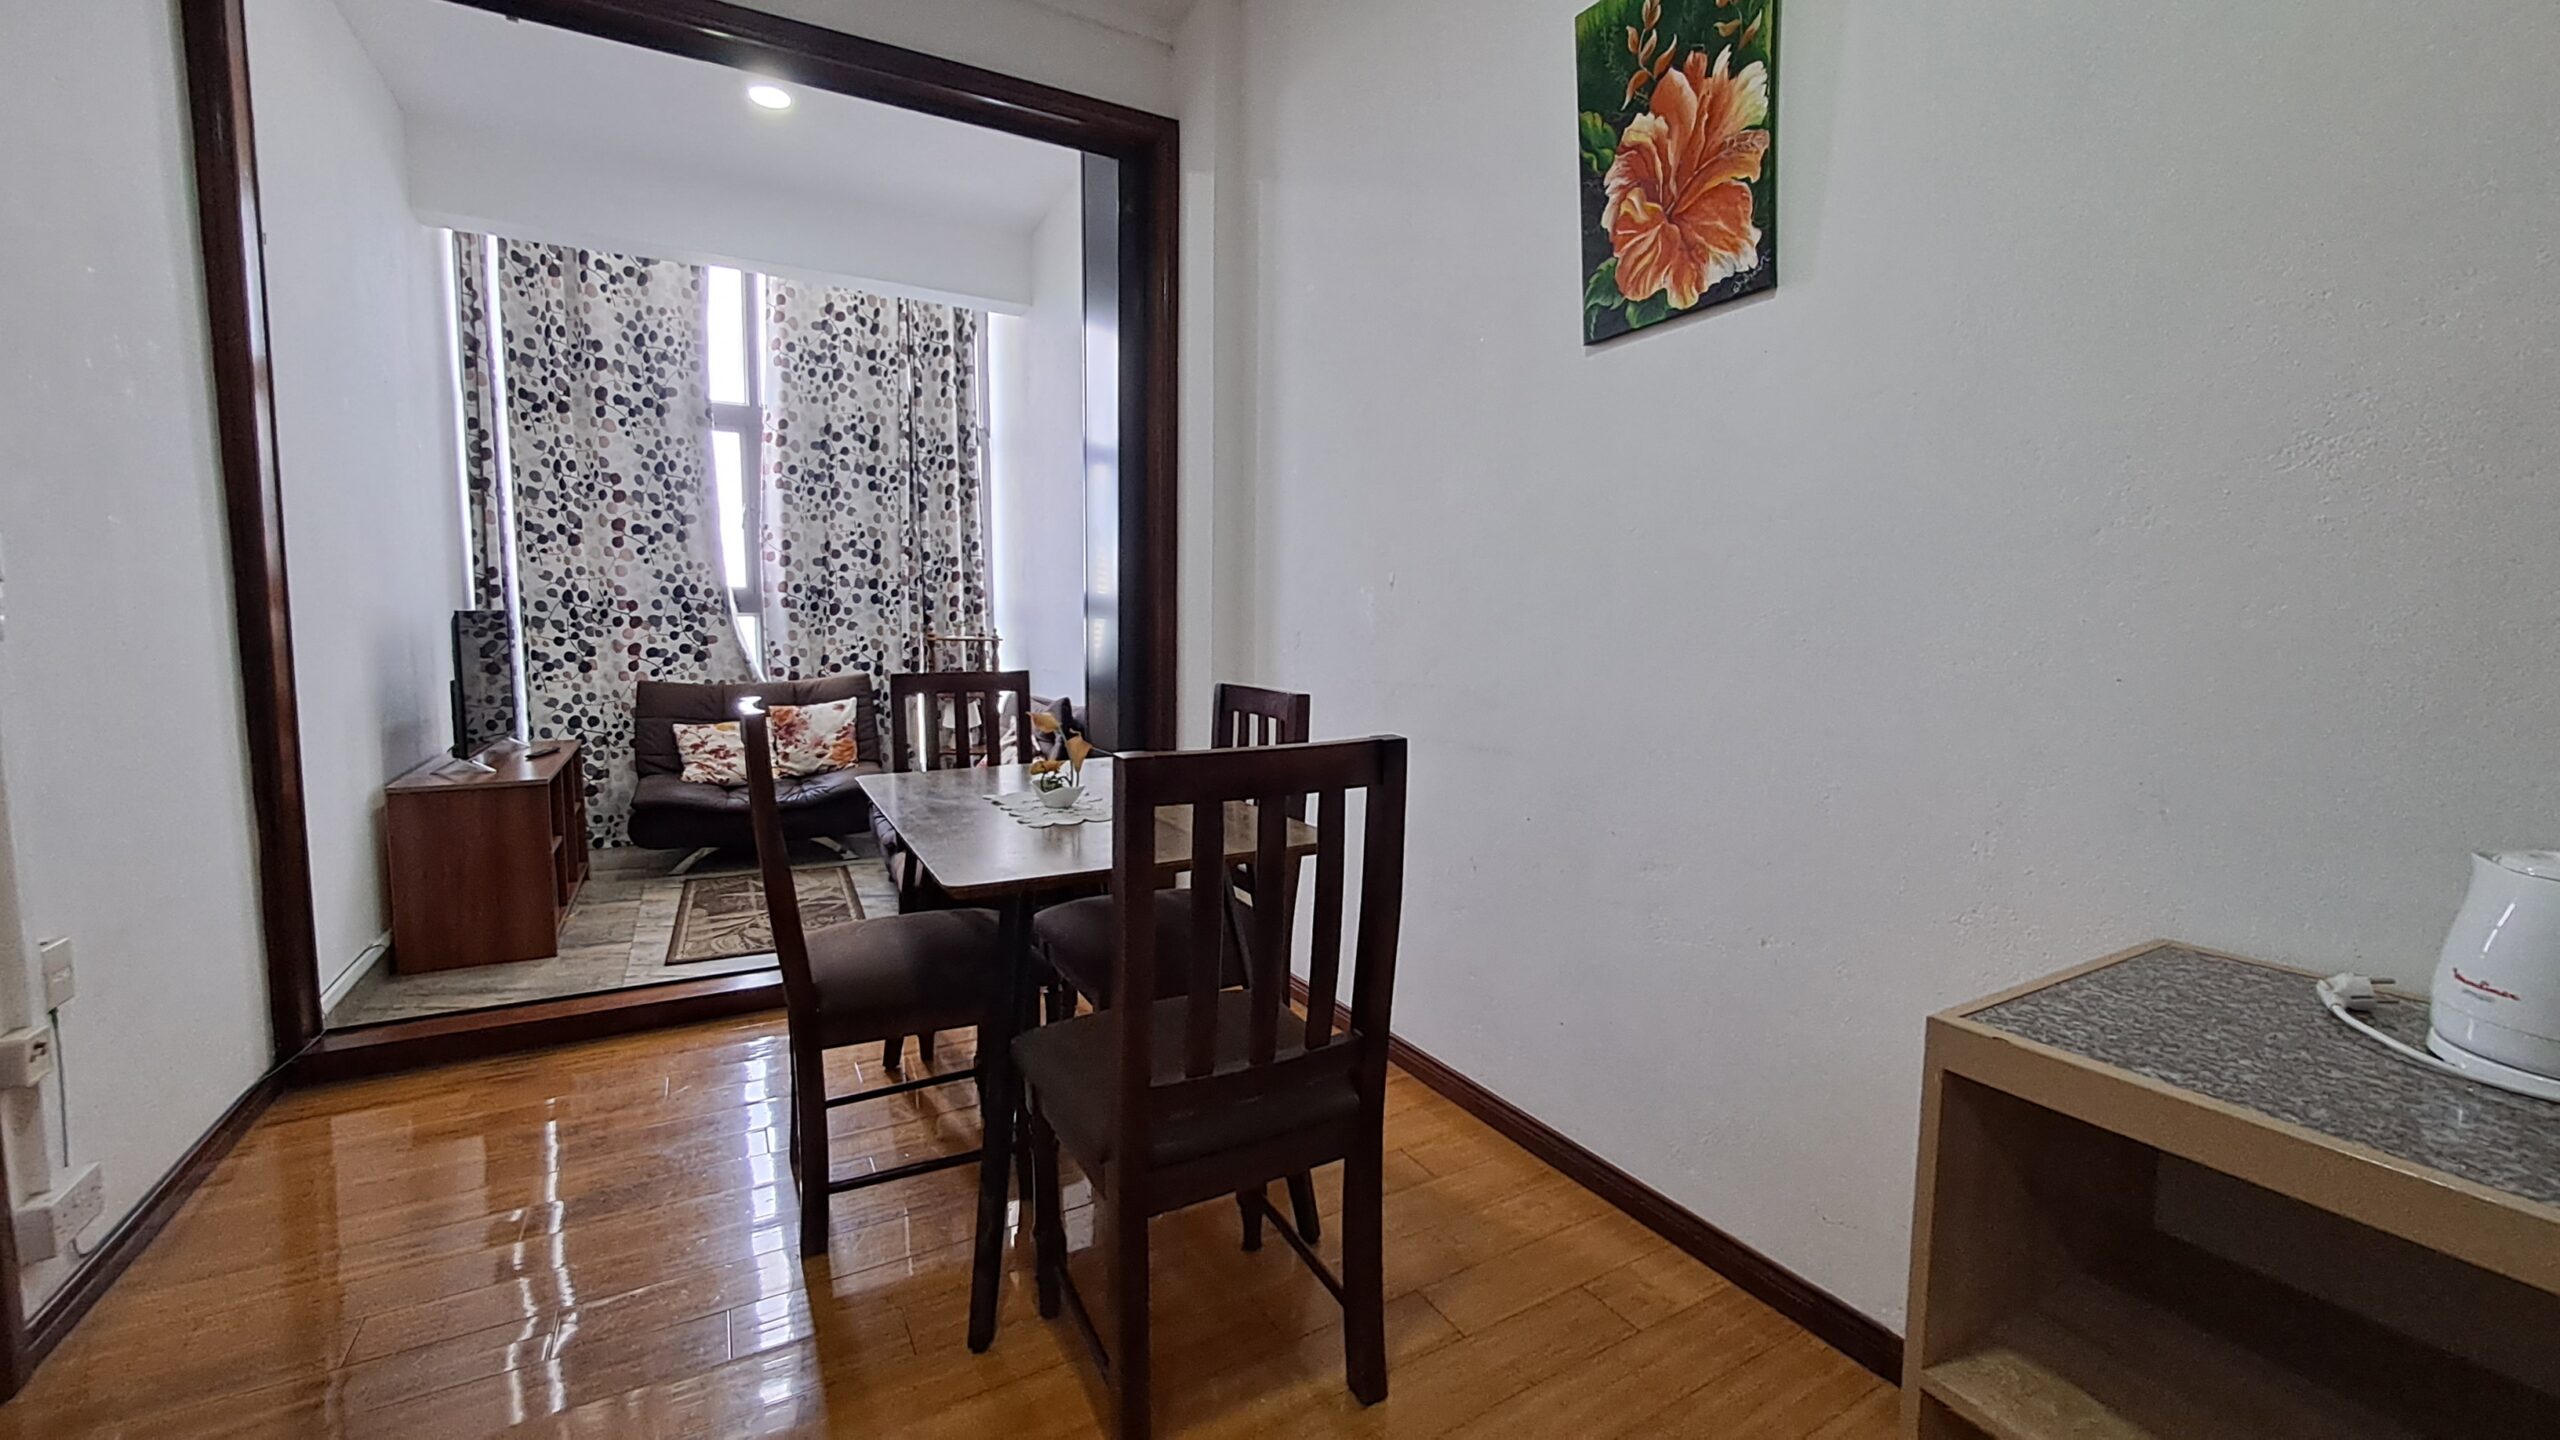 (English) Apartment for rent